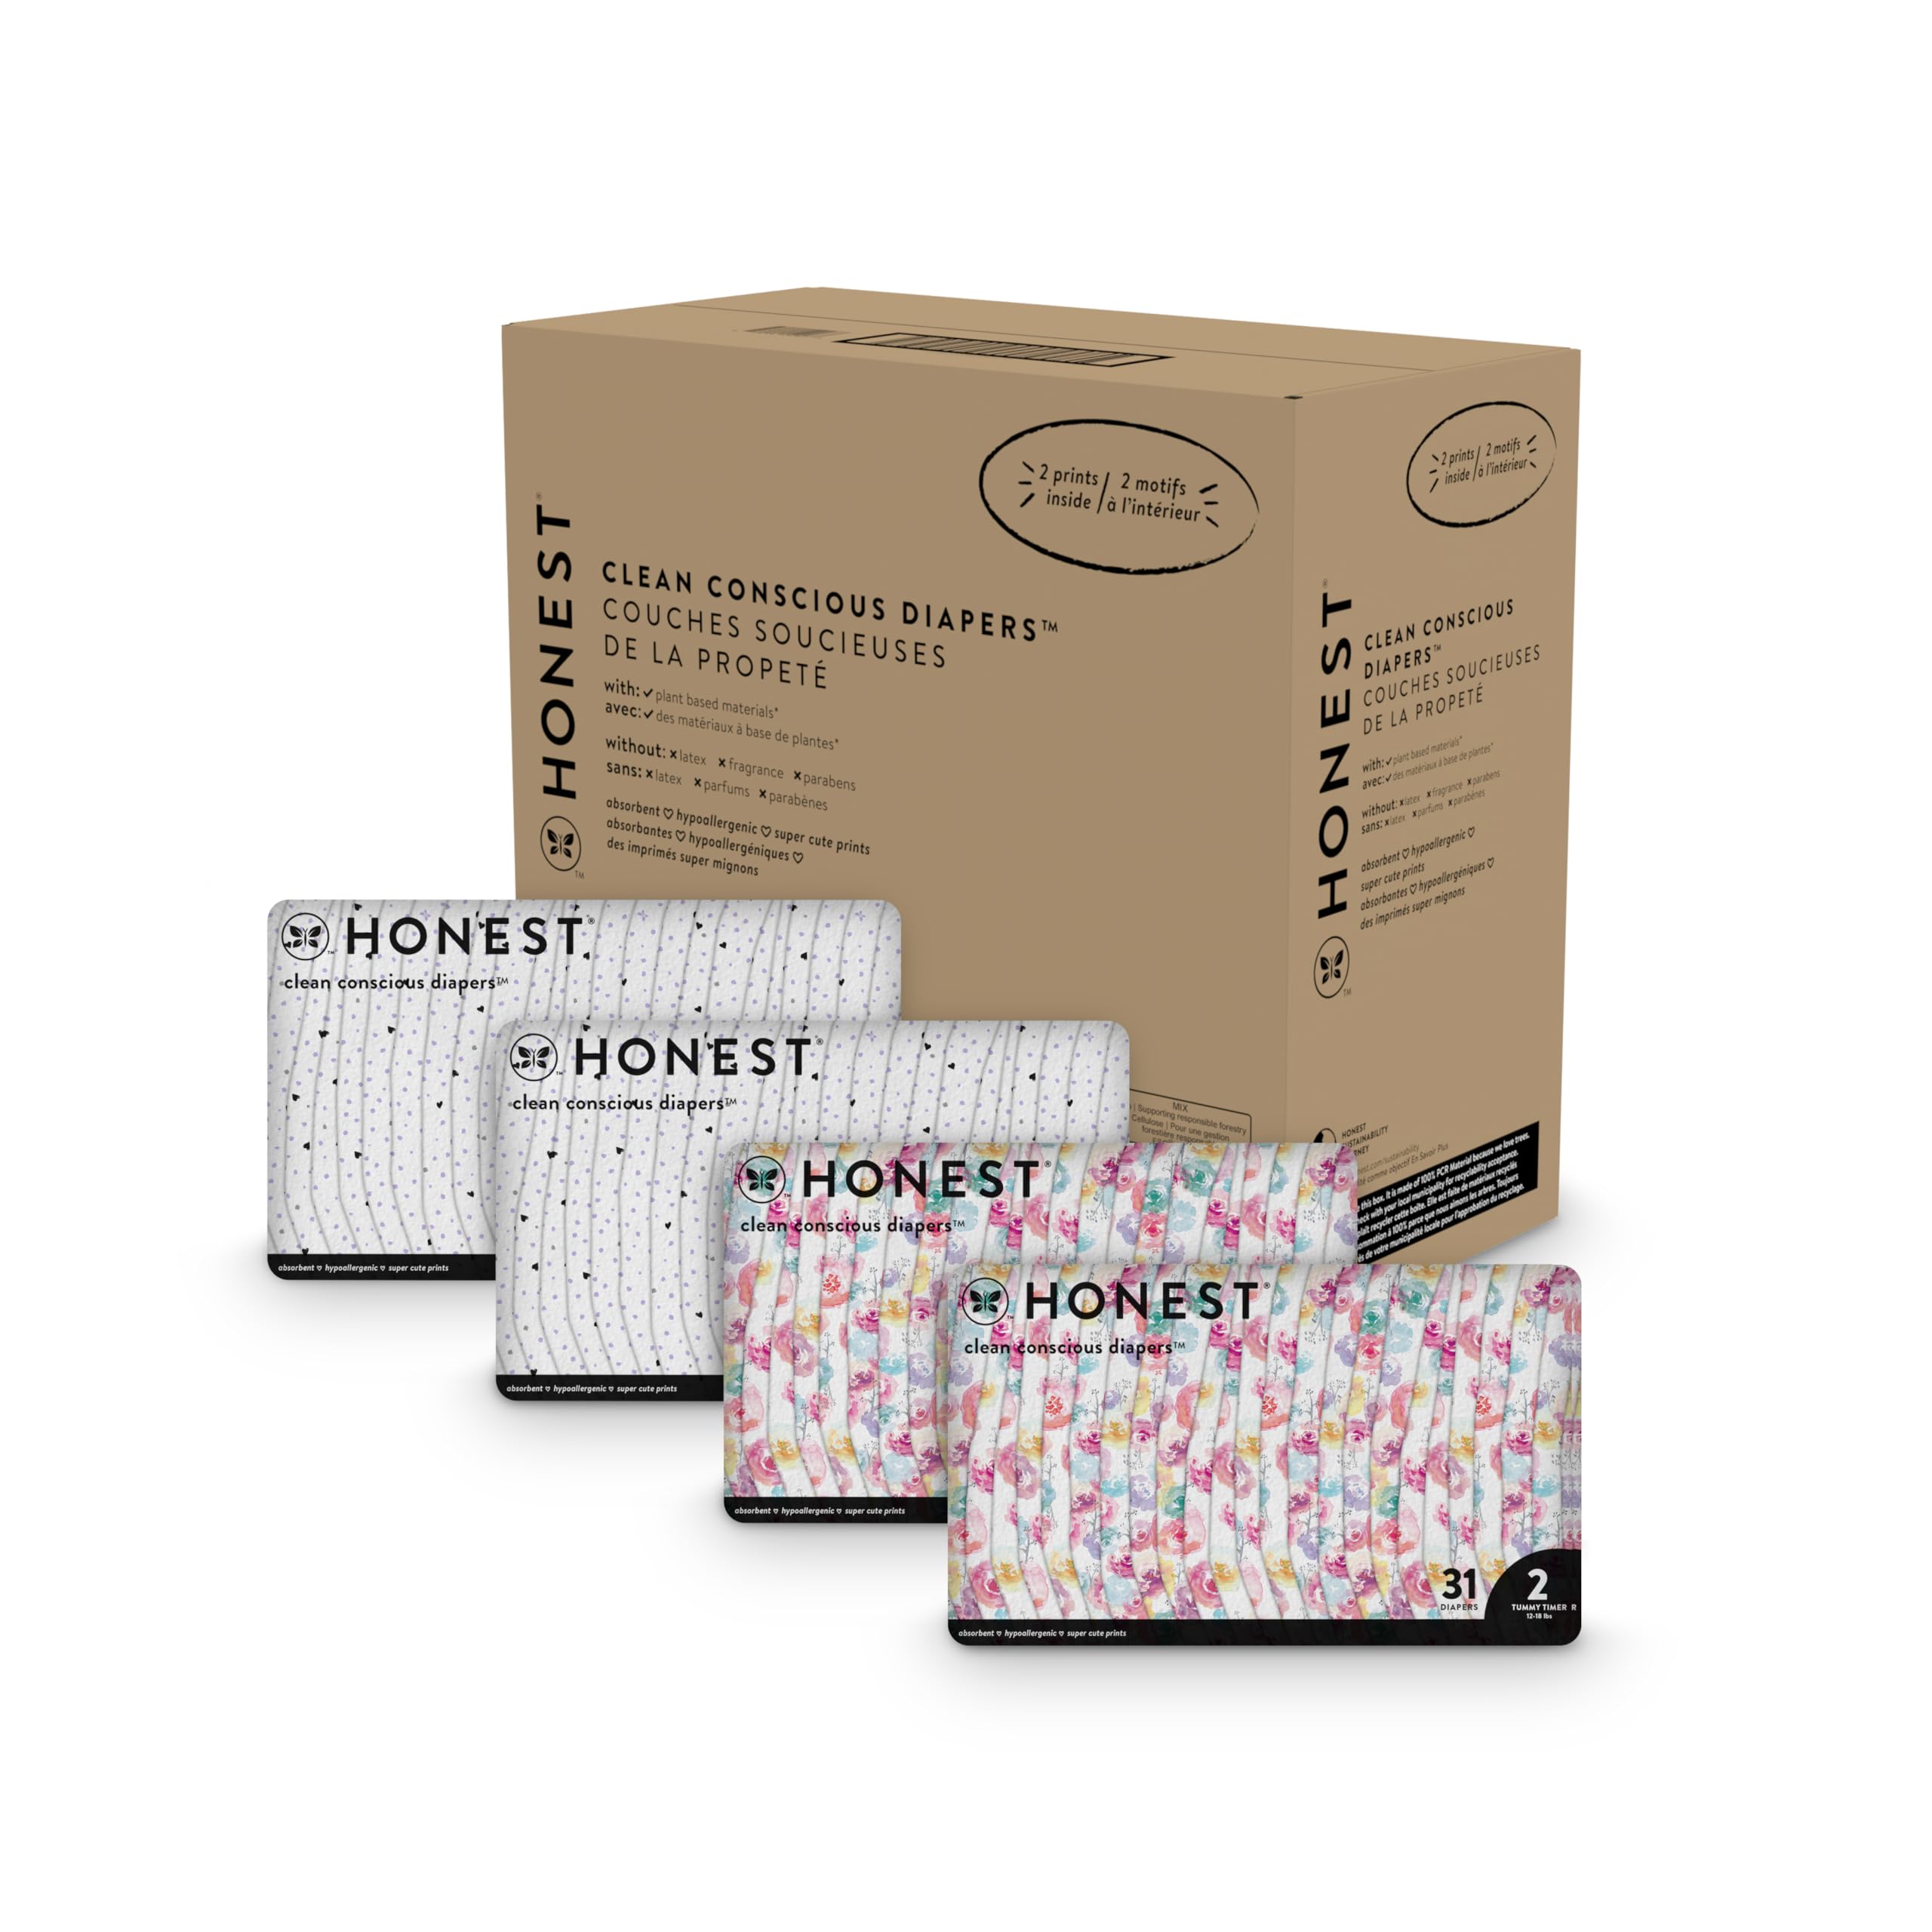 The Honest Company Clean Conscious Diapers | Plant-Based, Sustainable | Young at Heart + Rose Blossom | Super Club Box, Size 2 (12-18 lbs), 124 Count